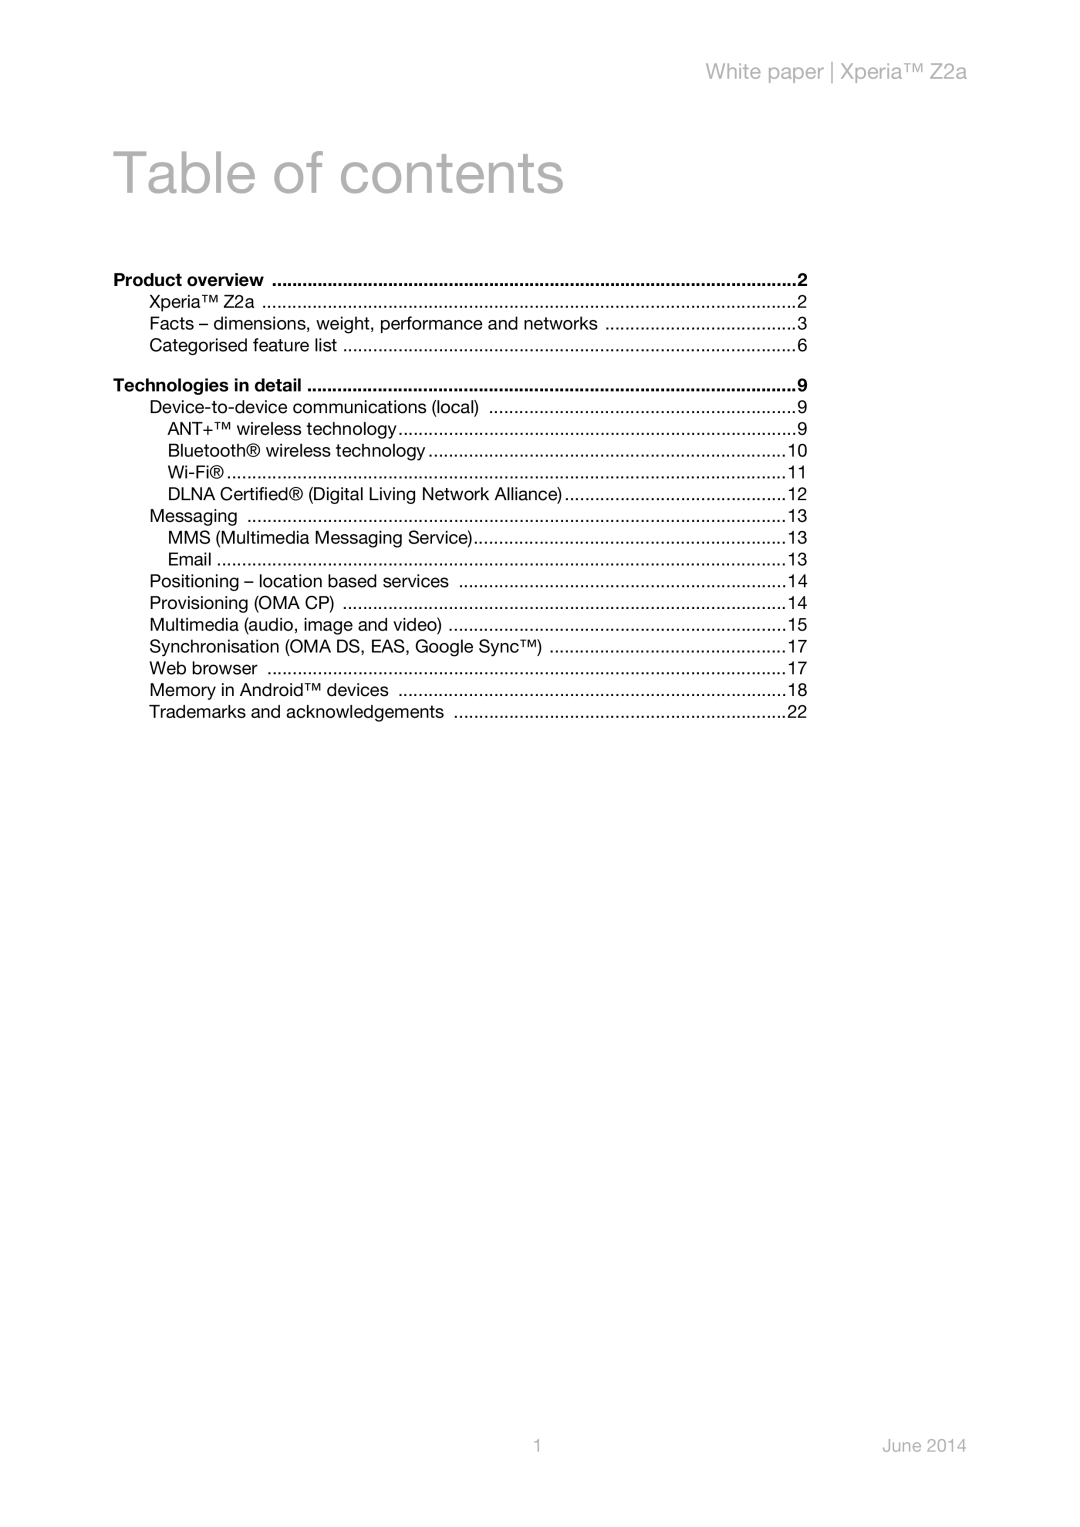 Sony manual Table of contents, White paper Xperia Z2a, June 